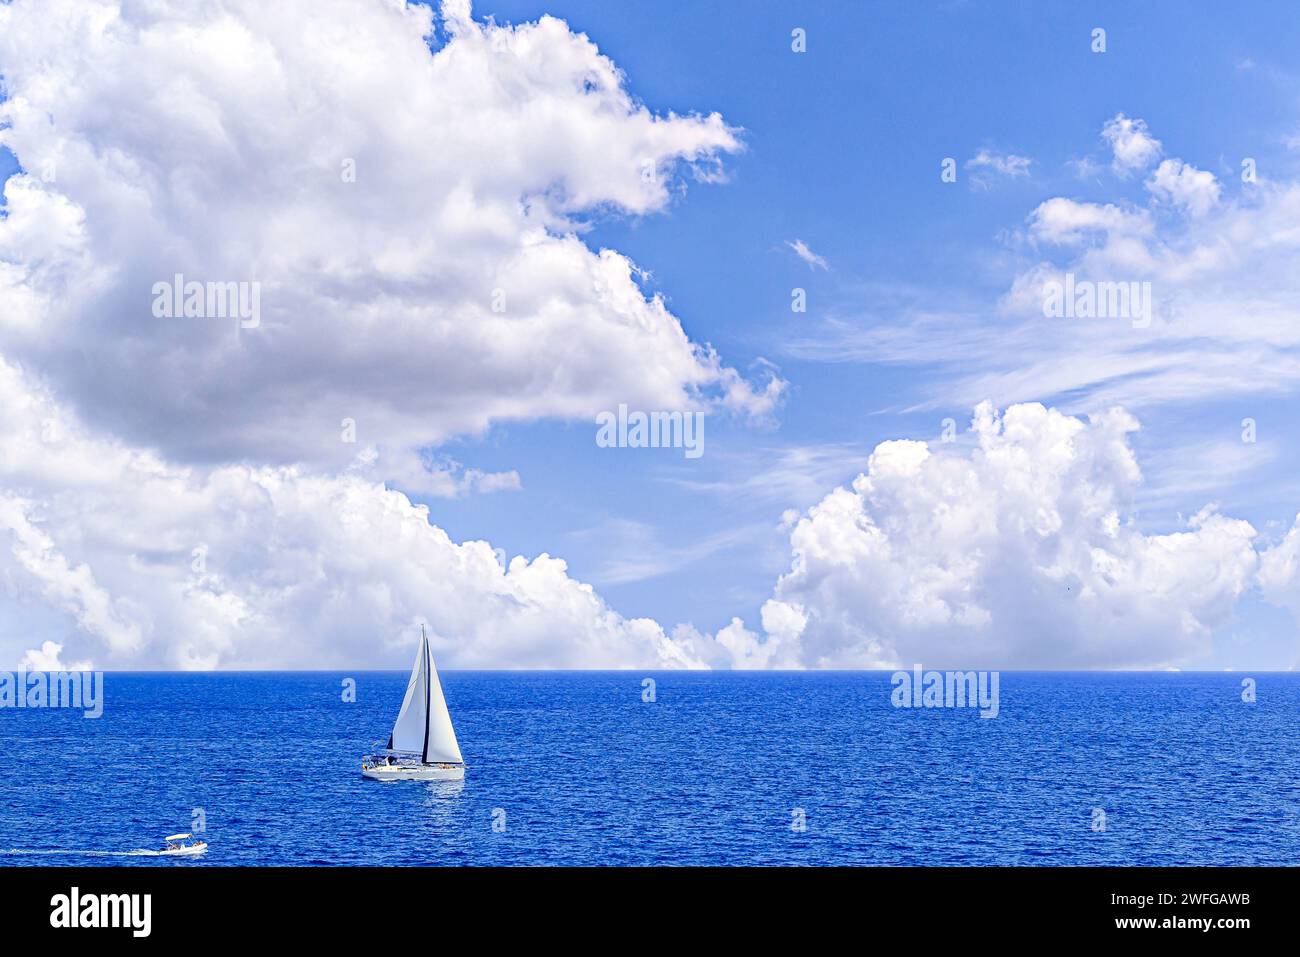 Boat, sailboat sailing on the beach of Mallorca under a blue sky with white clouds Stock Photo